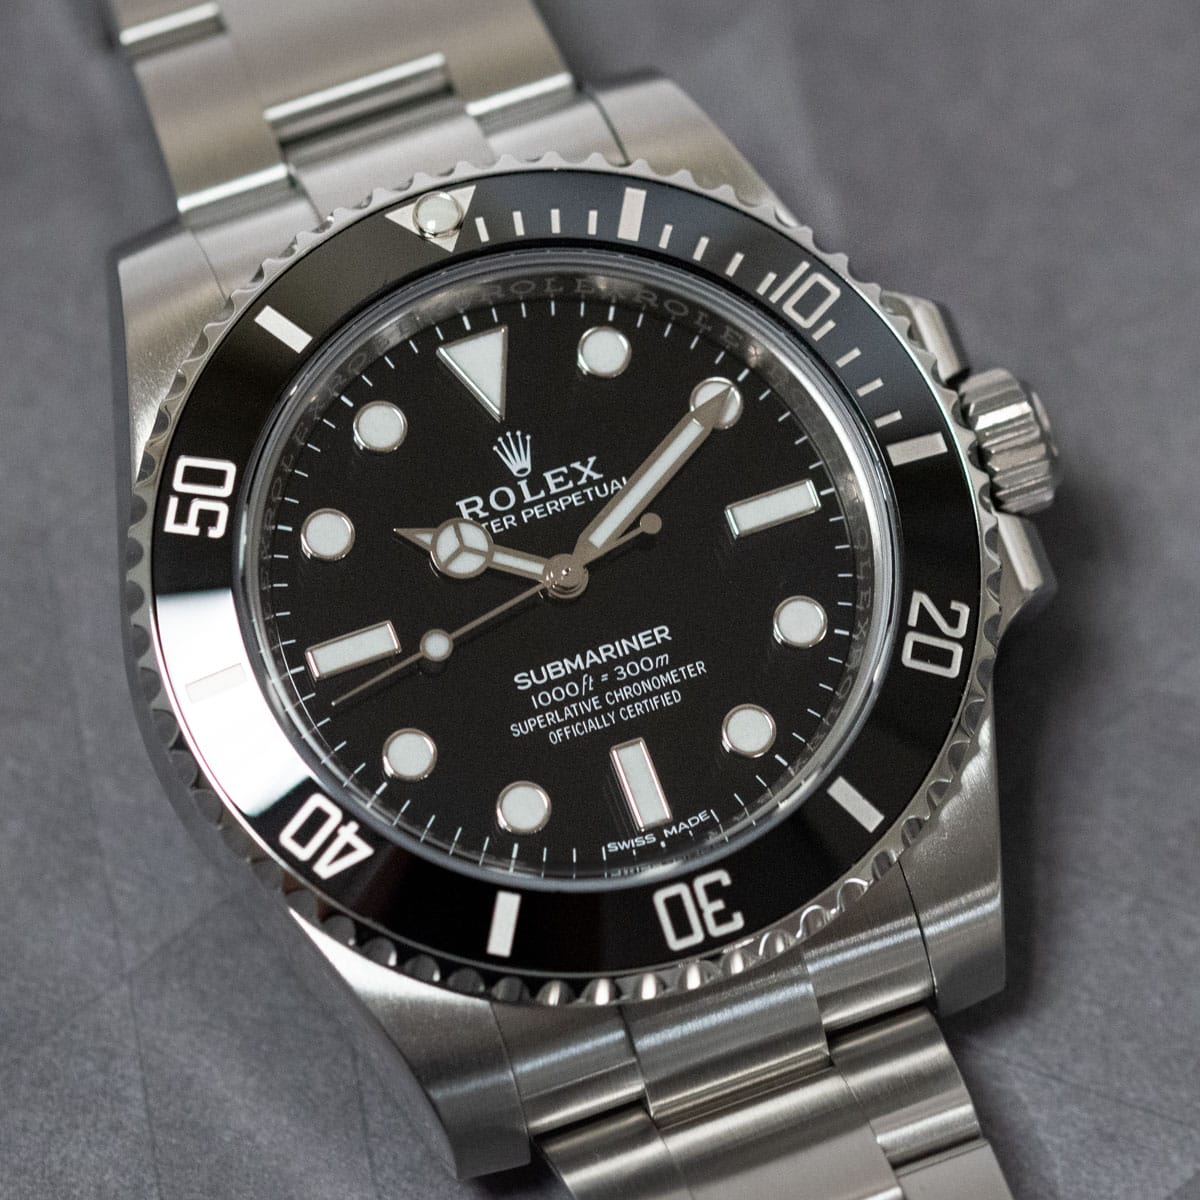 Stylied photo of  of Submariner